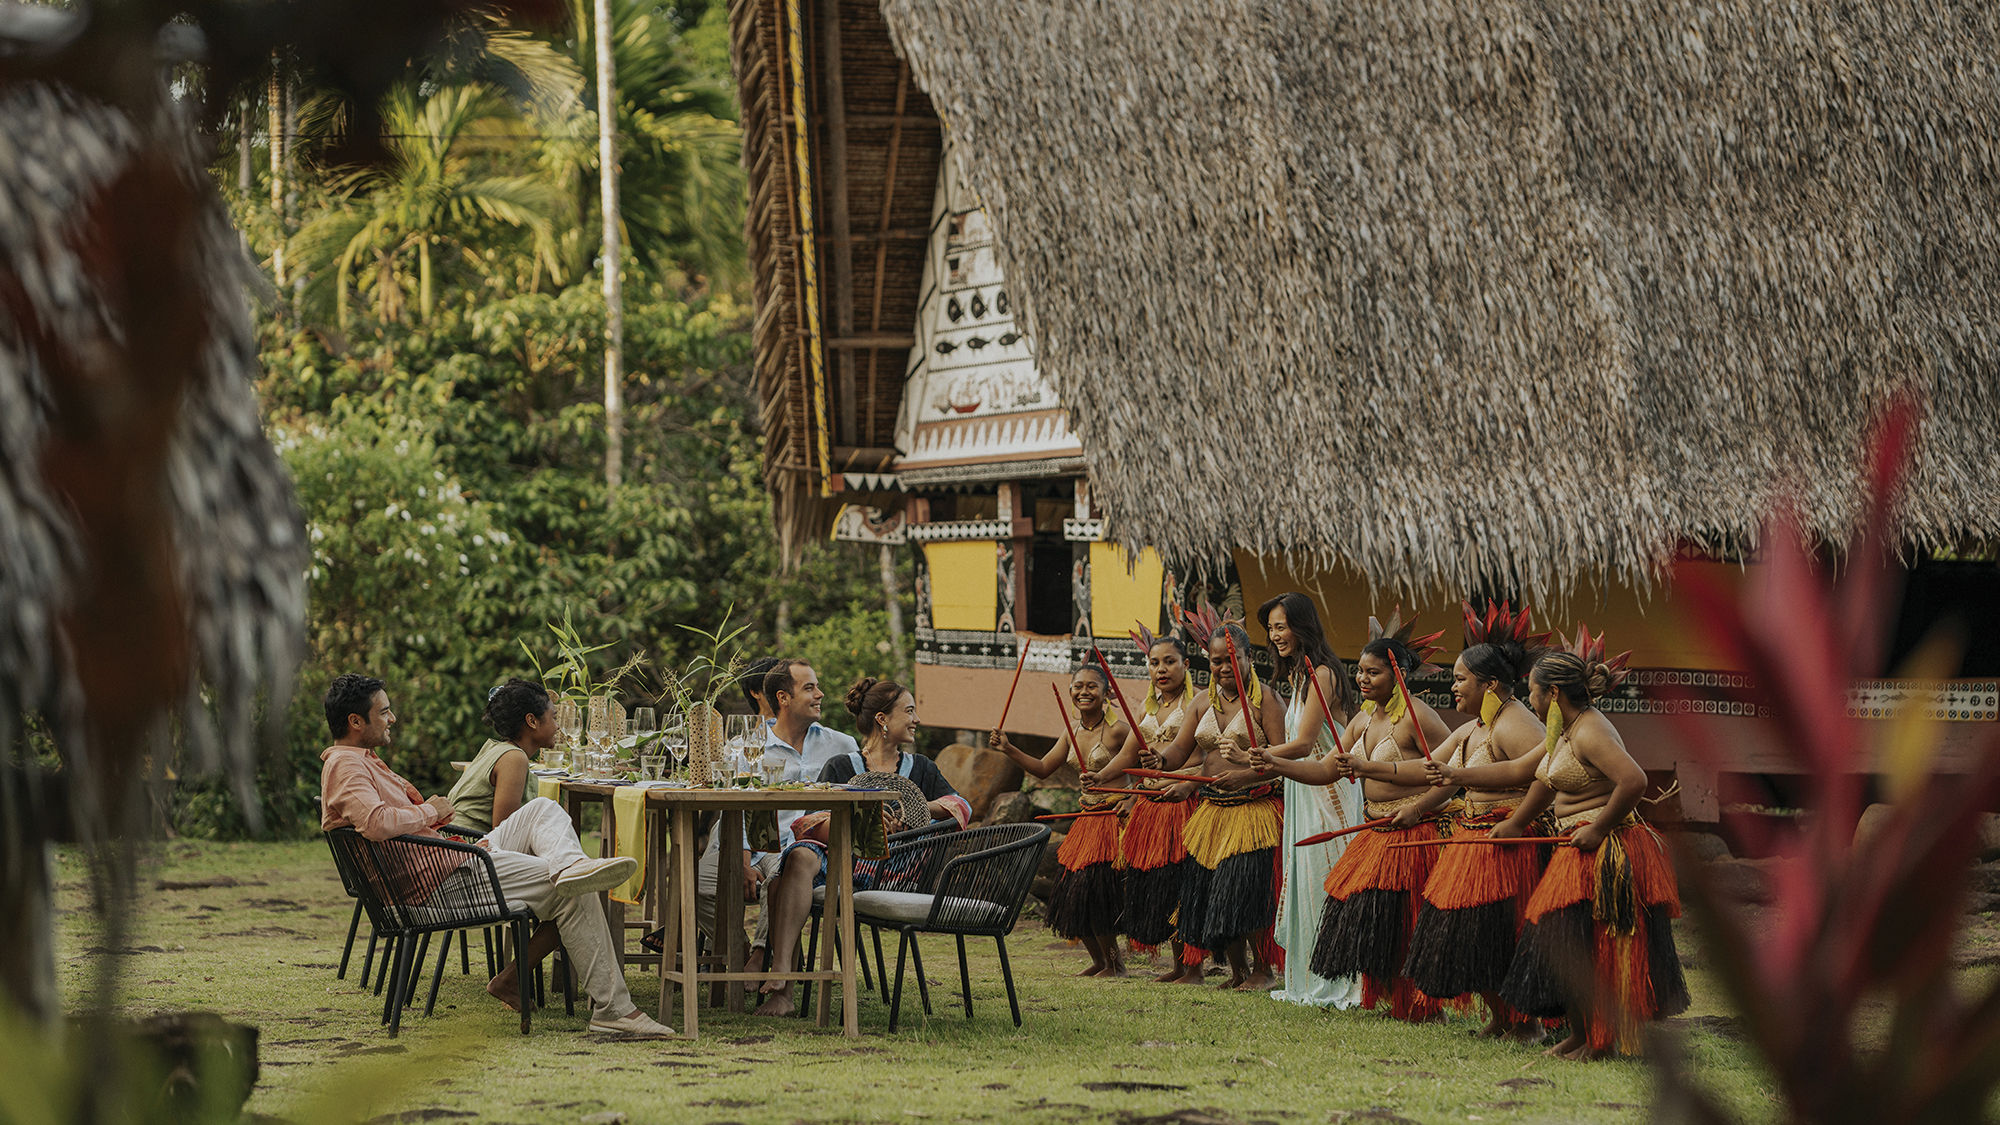 Guests enjoying an on-shore cultural experience as part of their stay aboard the Four Seasons Explorer, Palau.